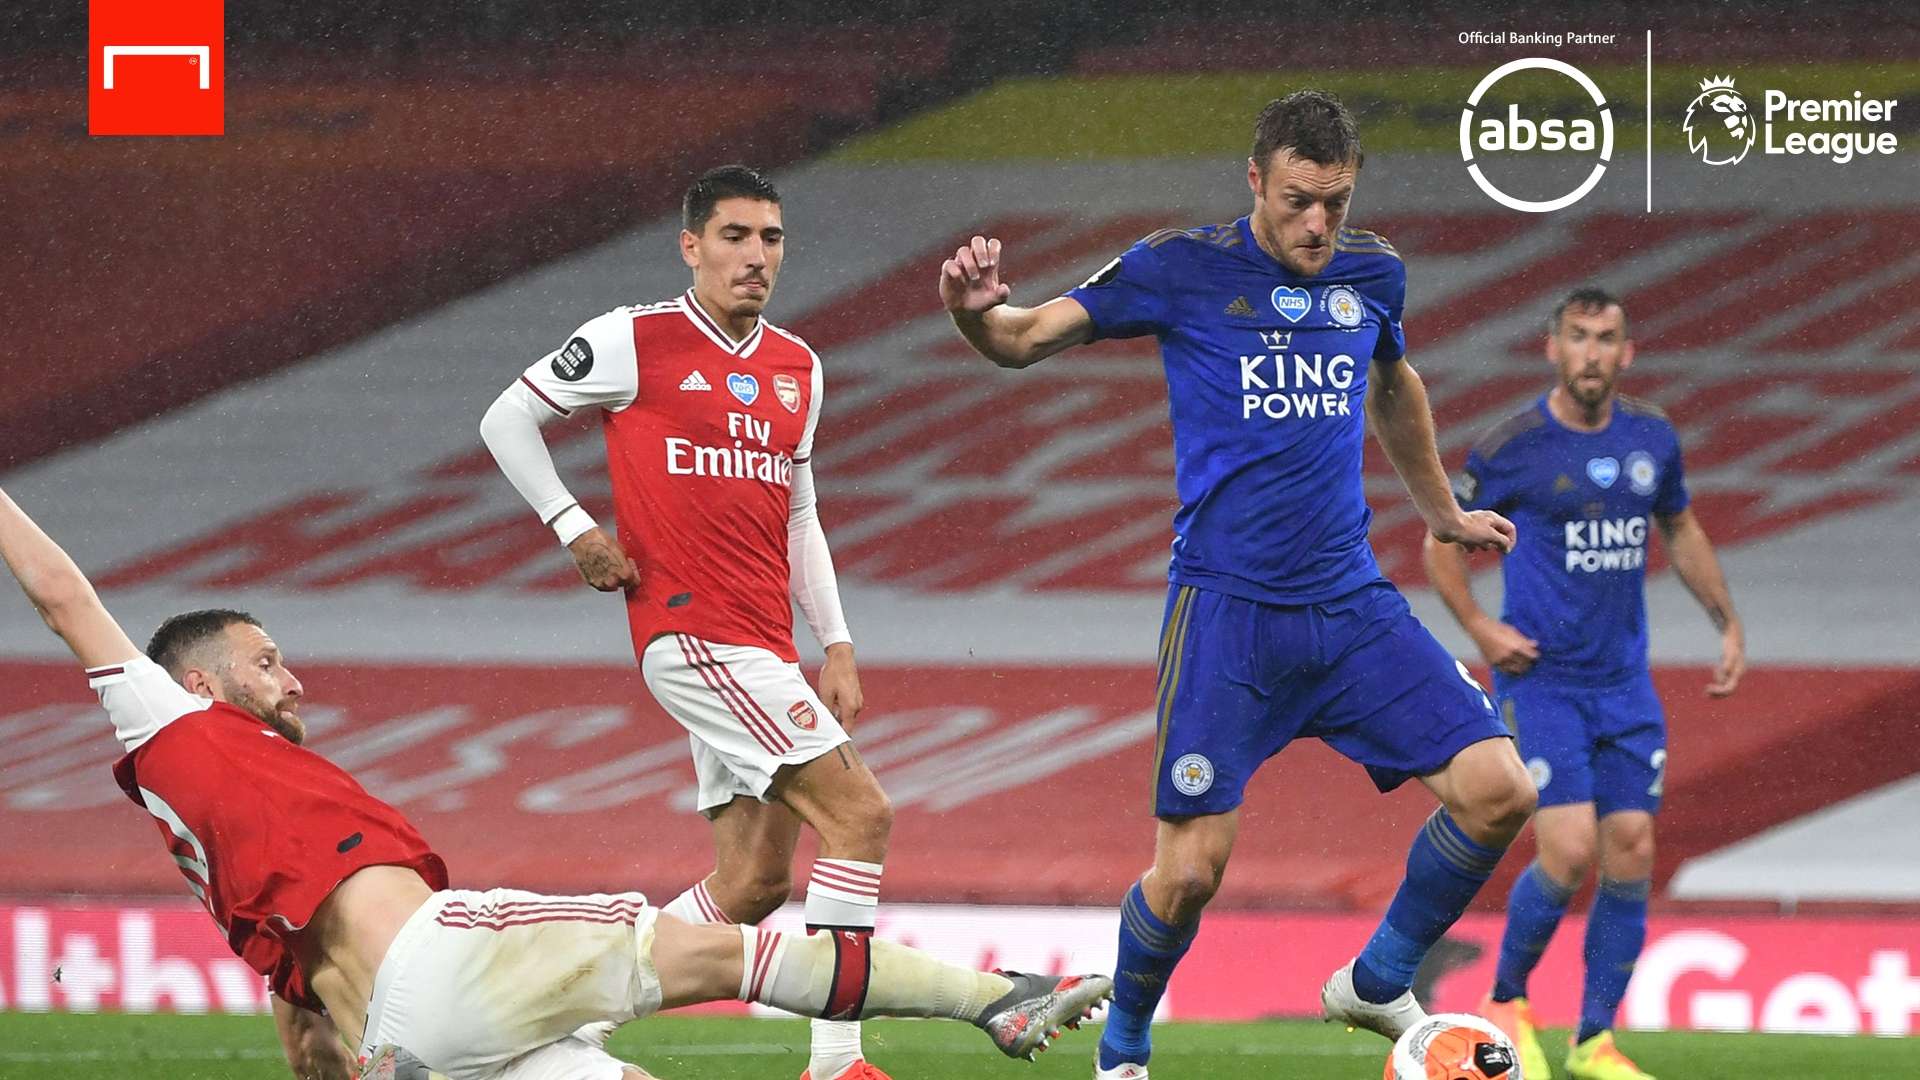 Absa Header Image_Leicester City vs Arsenal